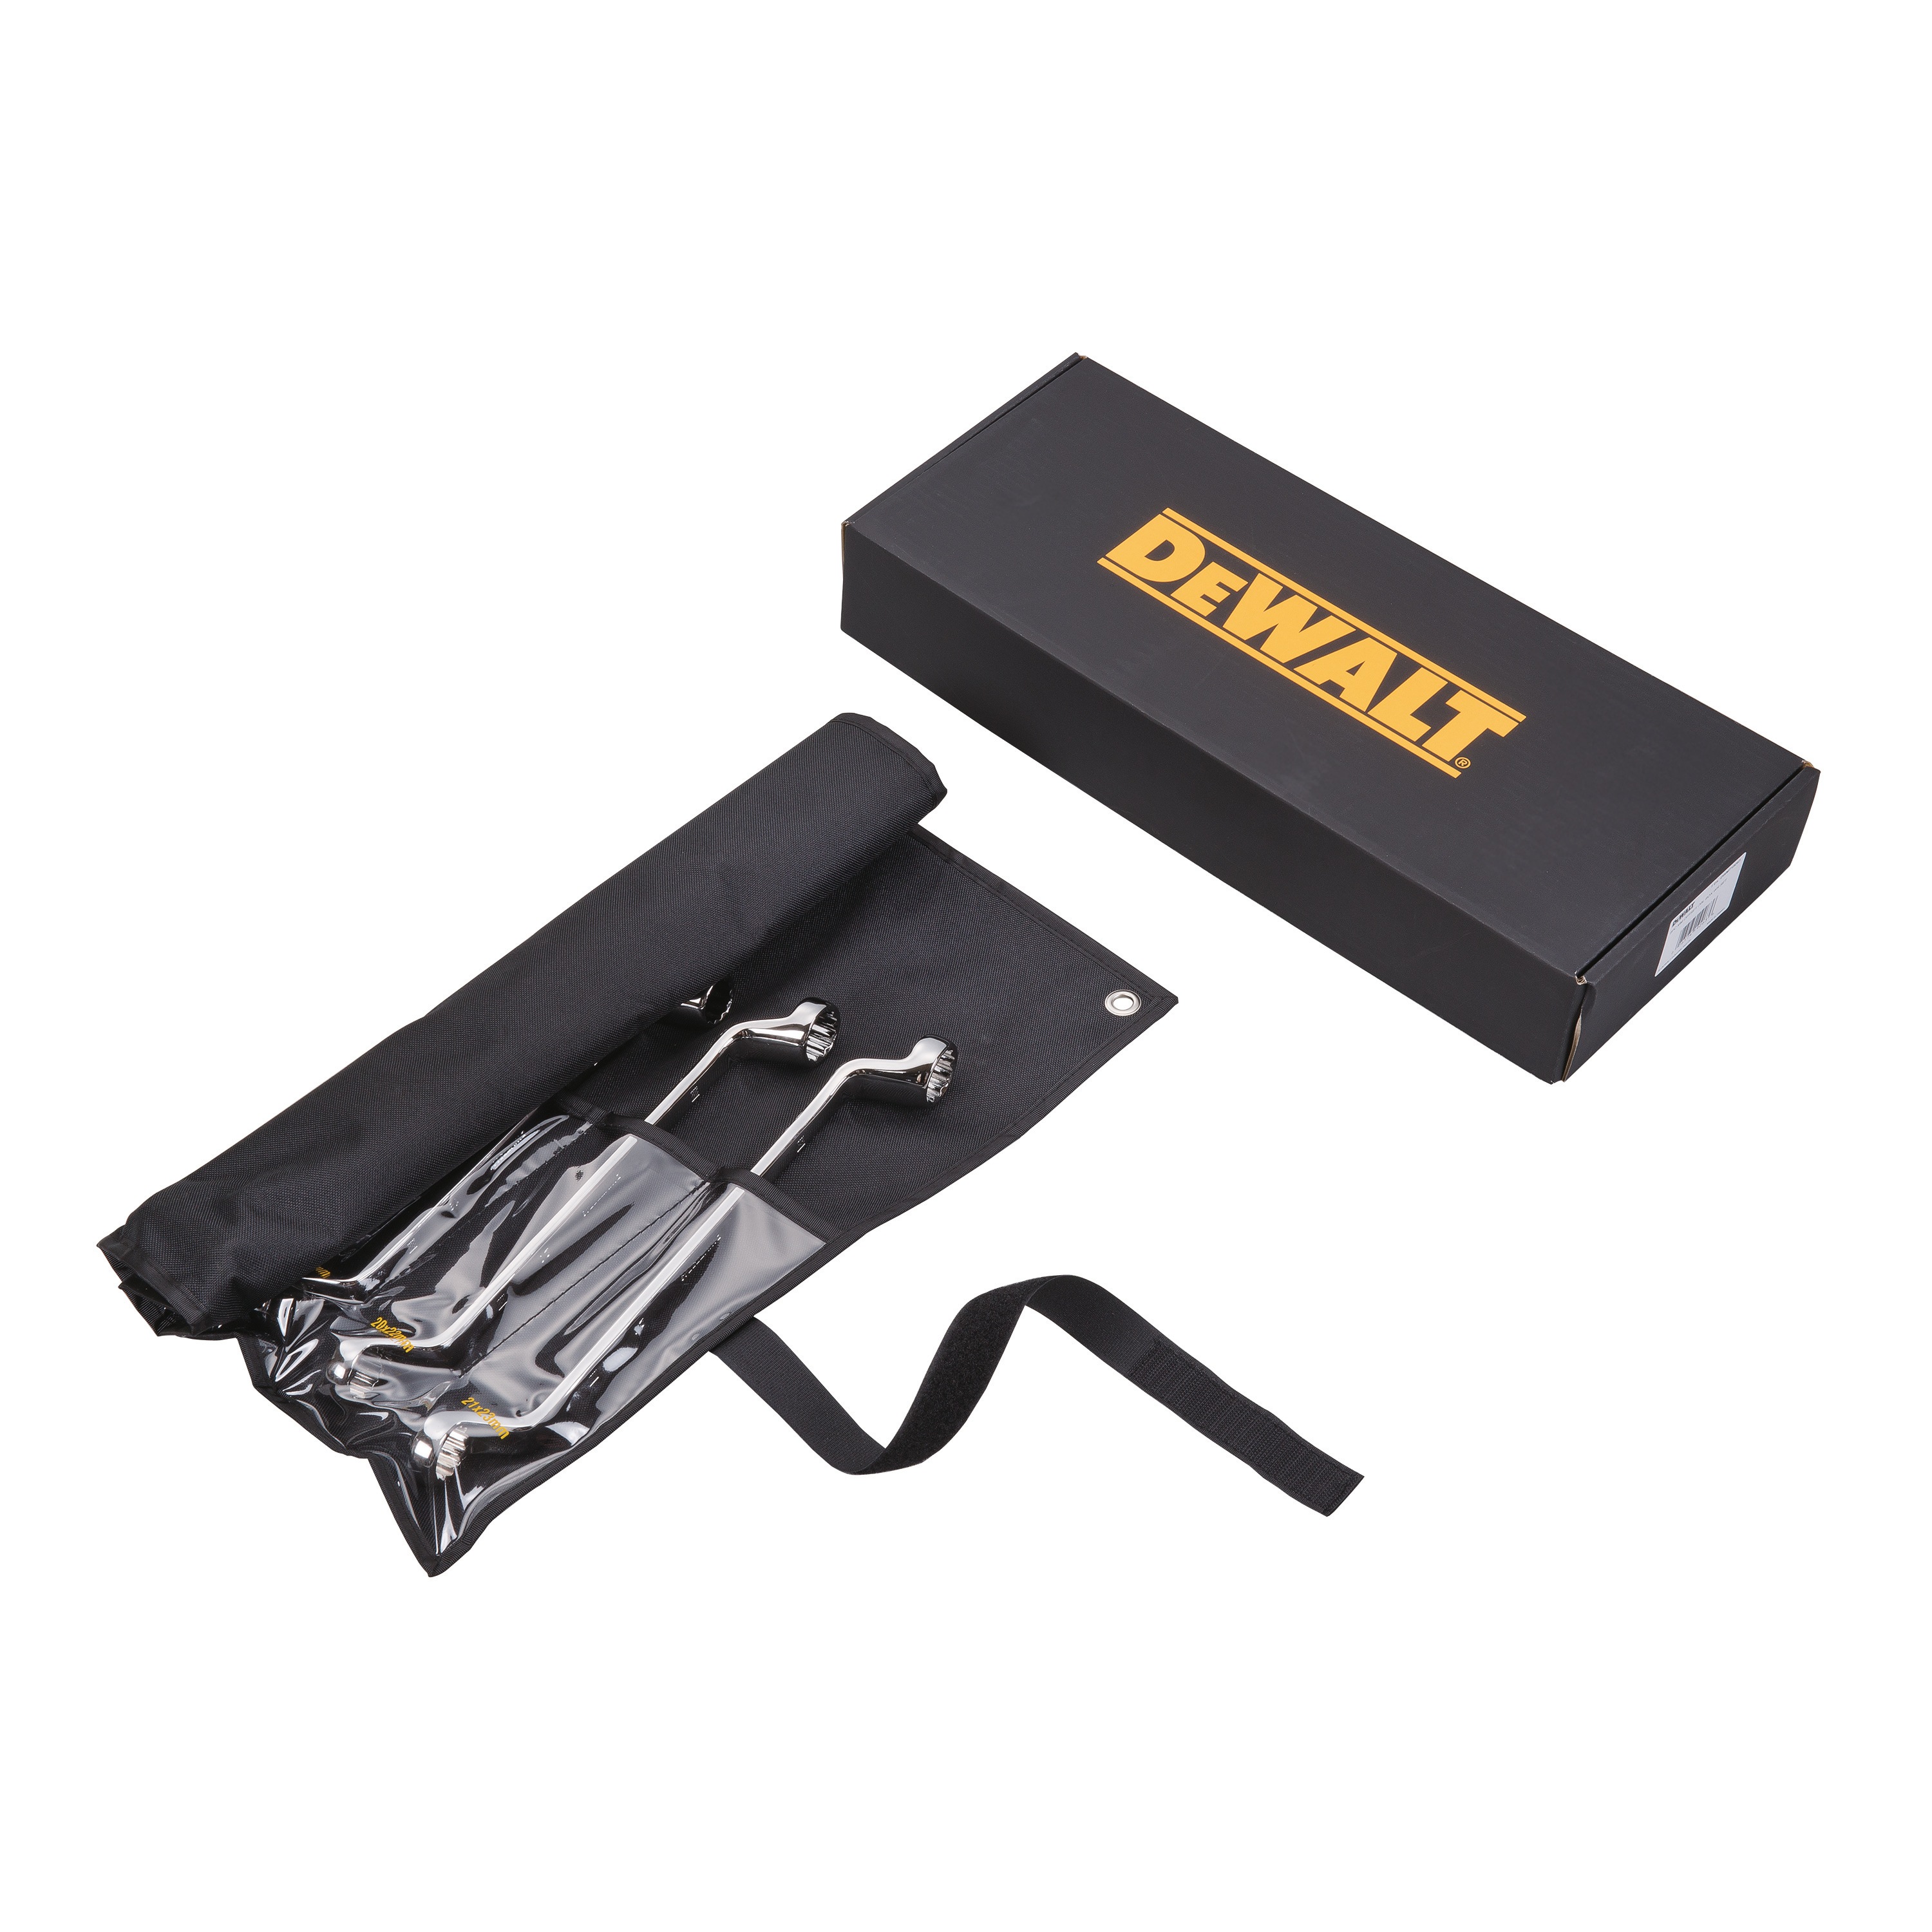 DEWALT 5 piece full polish offset double box wrench set with its case.